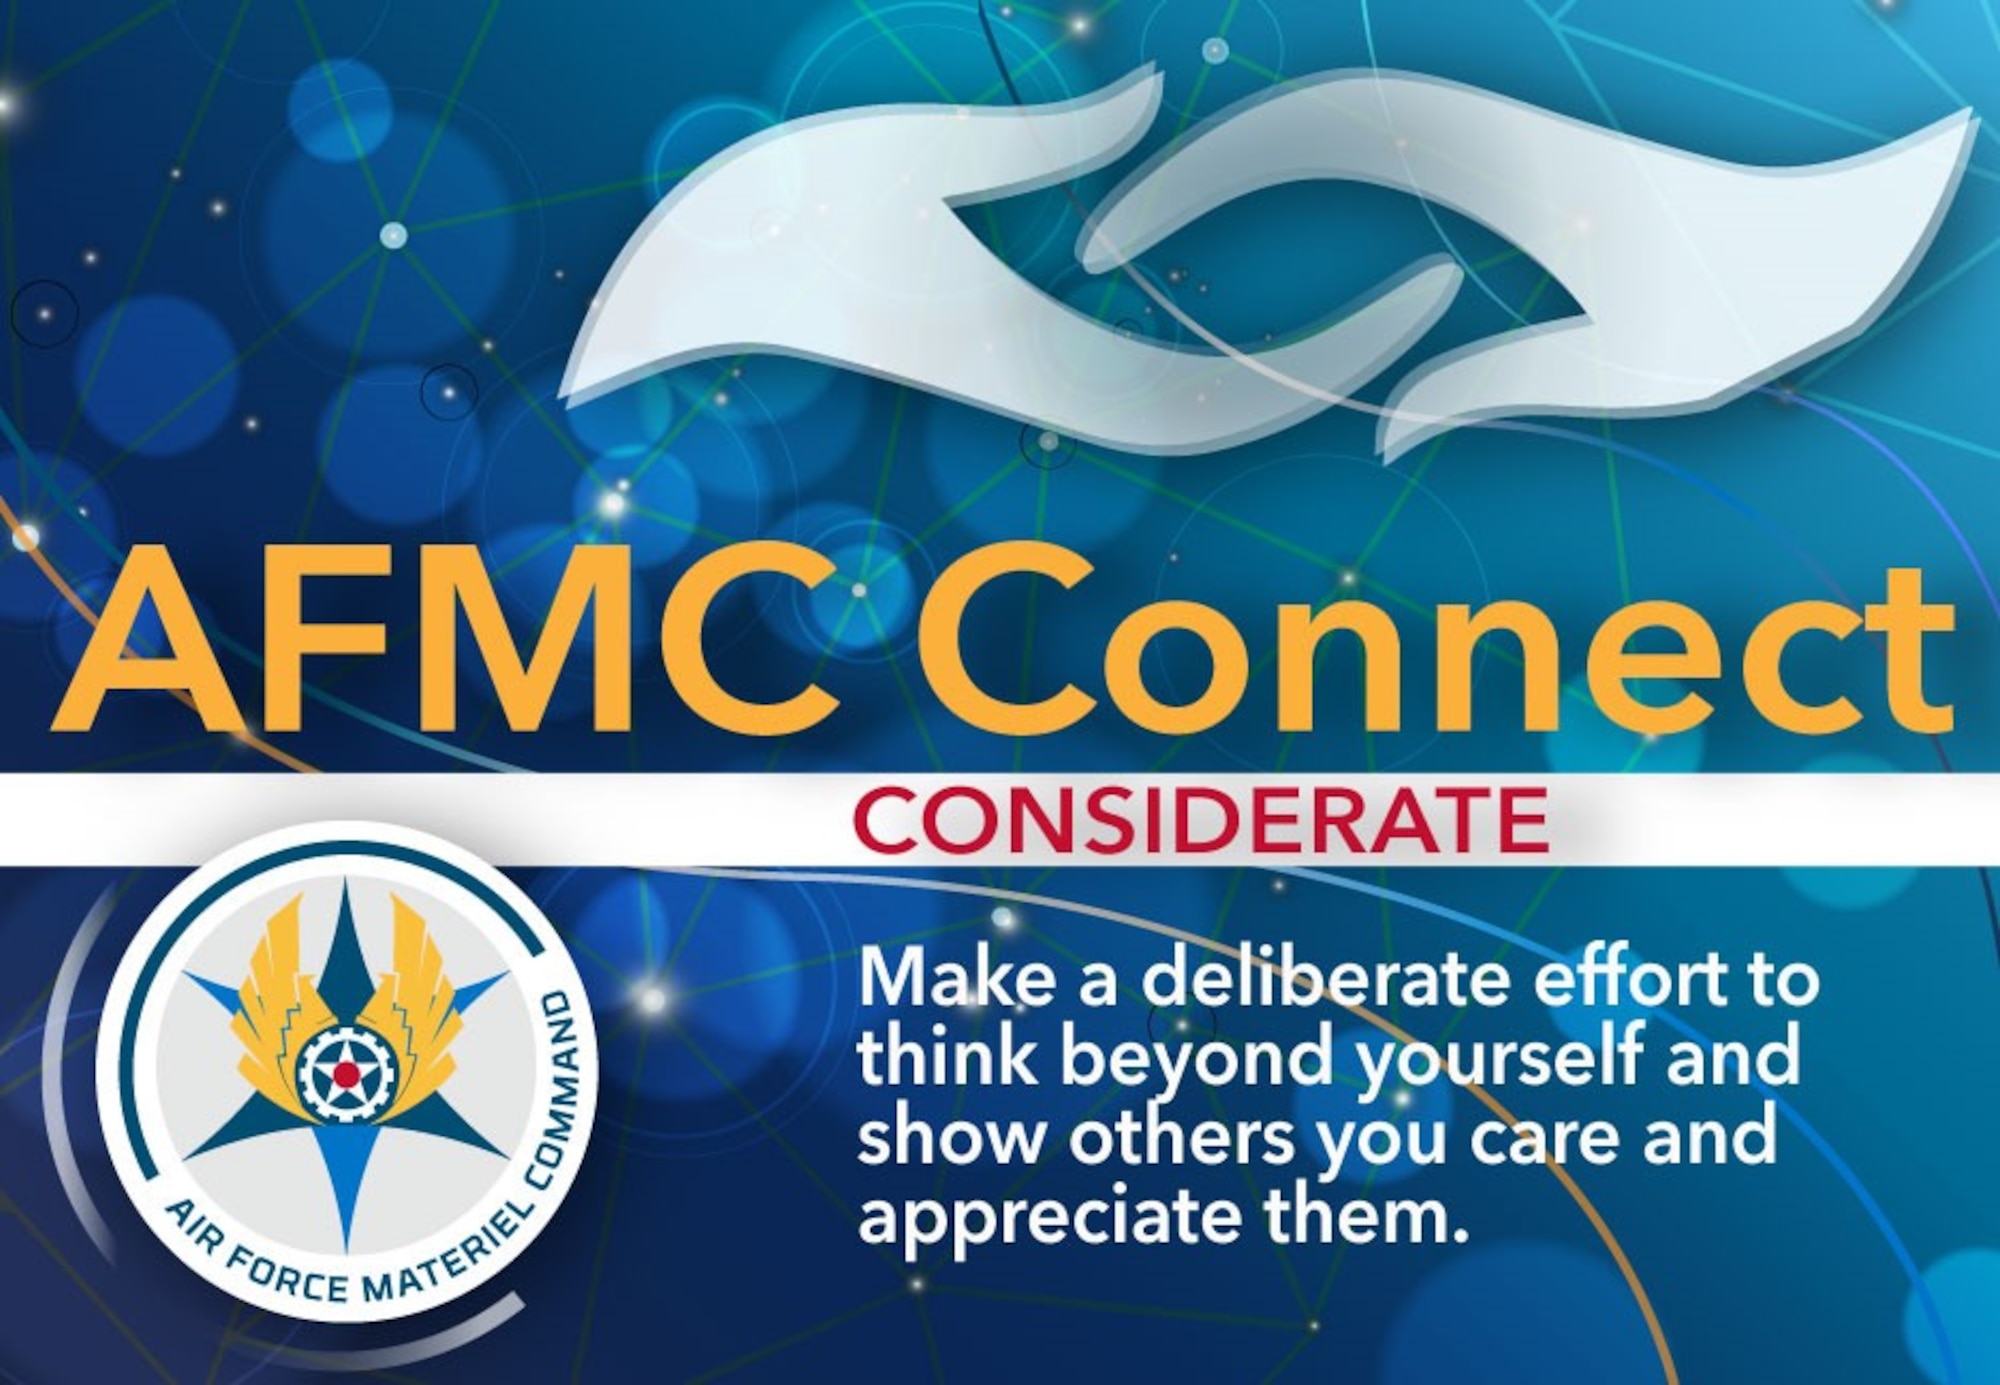 AFMC Connect, Considerate